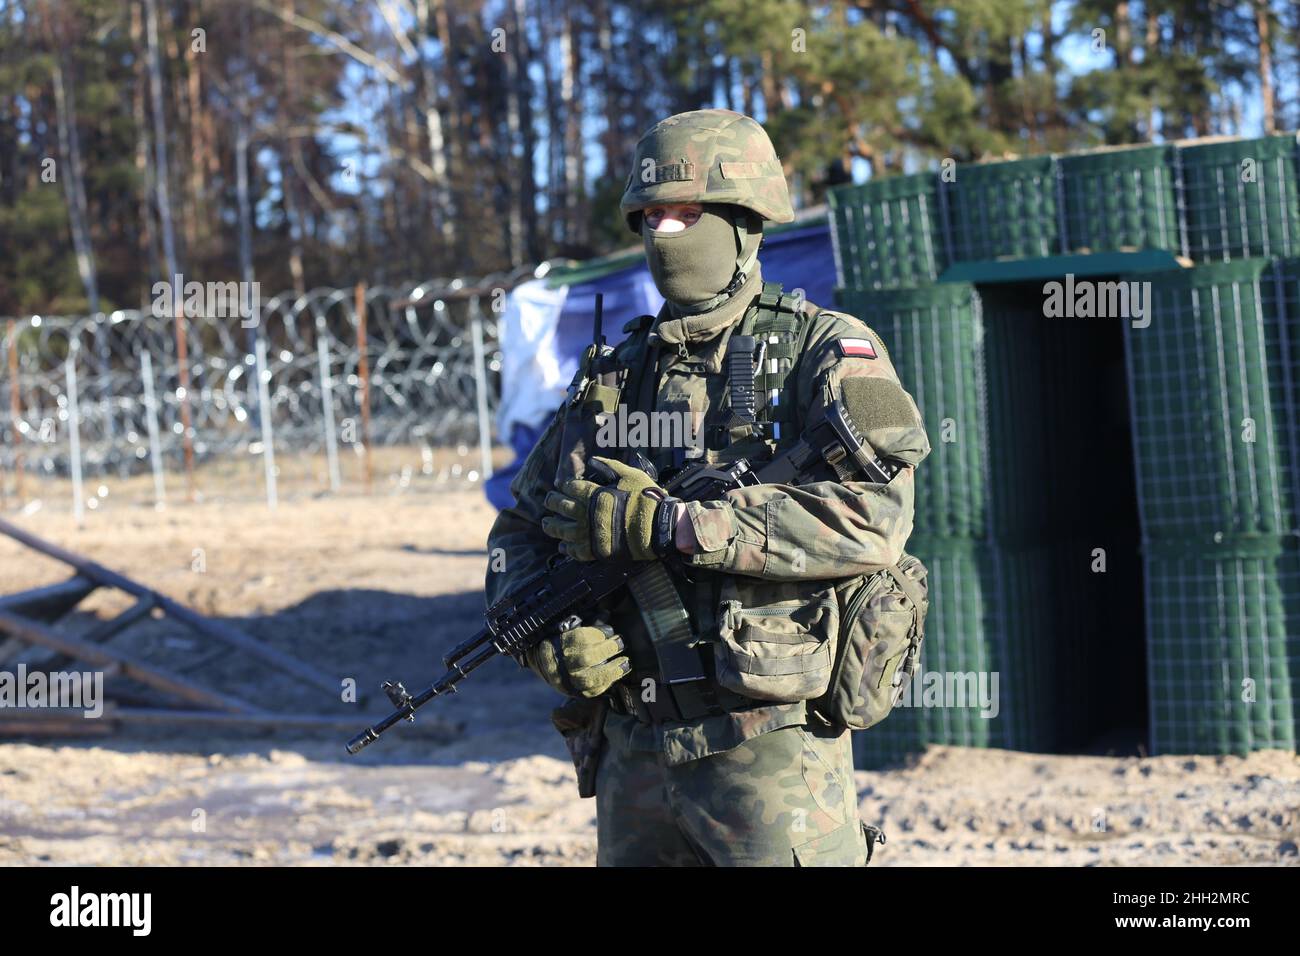 18 January 2022, Poland, Usnarz Gorny: A Polish soldier guards border installations near the village of Usnarz Gorny in the exclusion zone on Poland's border with Belarus. Poland has erected a temporary barbed wire fence to make it difficult for migrants to cross the EU's external border. Construction of a 5.5-meter-high barrier is to begin soon.(to dpa: 'Border with Belarus: Border guards command in Poland's exclusion zone') Photo: Doris Heimann/dpa Stock Photo